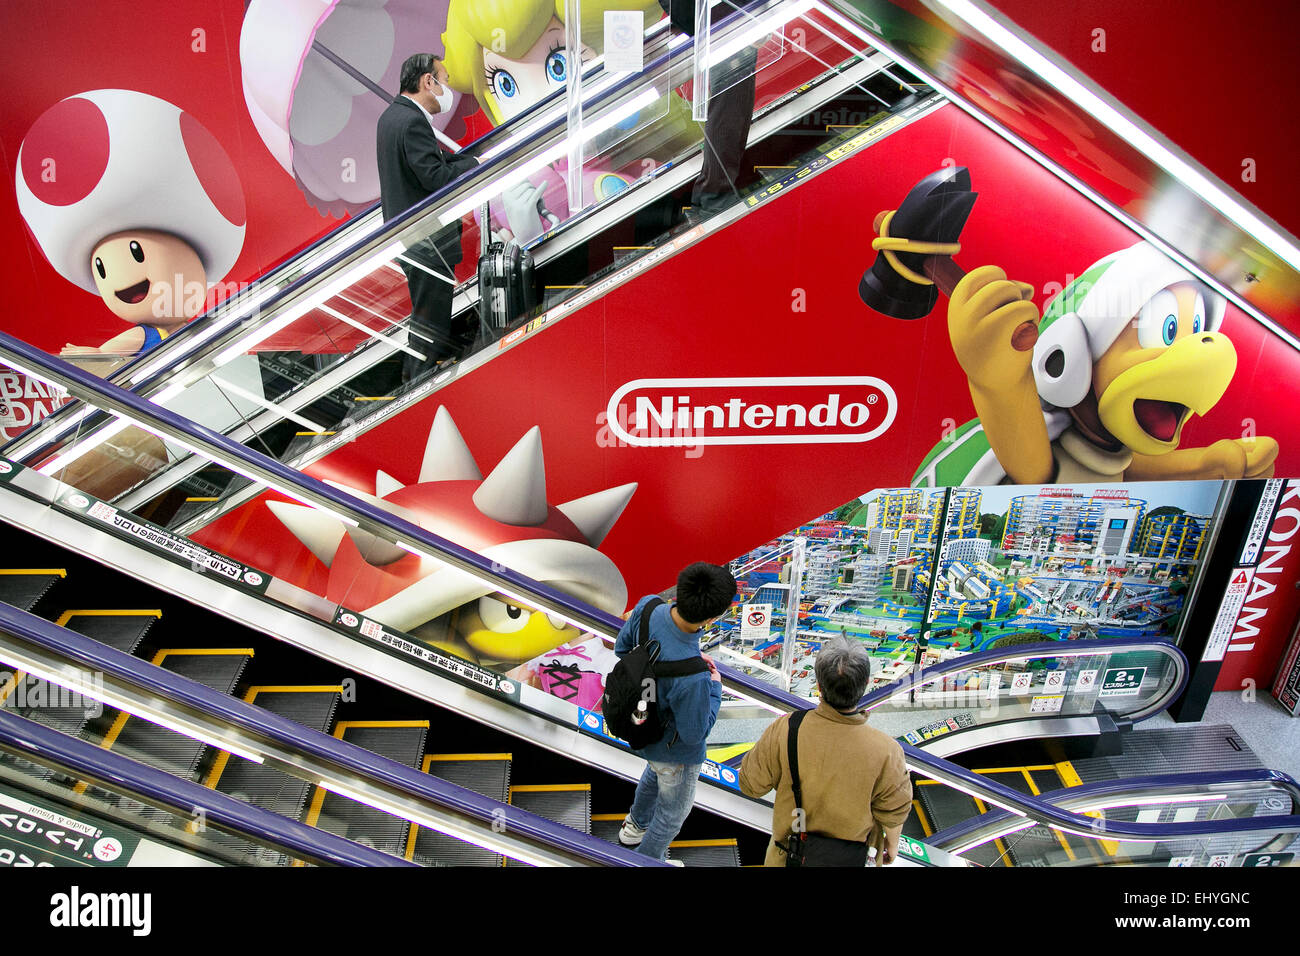 Nintendo characters posters in an electronics shop in Akihabara district on  March 19, 2015, Tokyo, Japan. In a press conference on Tuesday 17th Nintendo  announced a new alliance with Japanese mobile portal